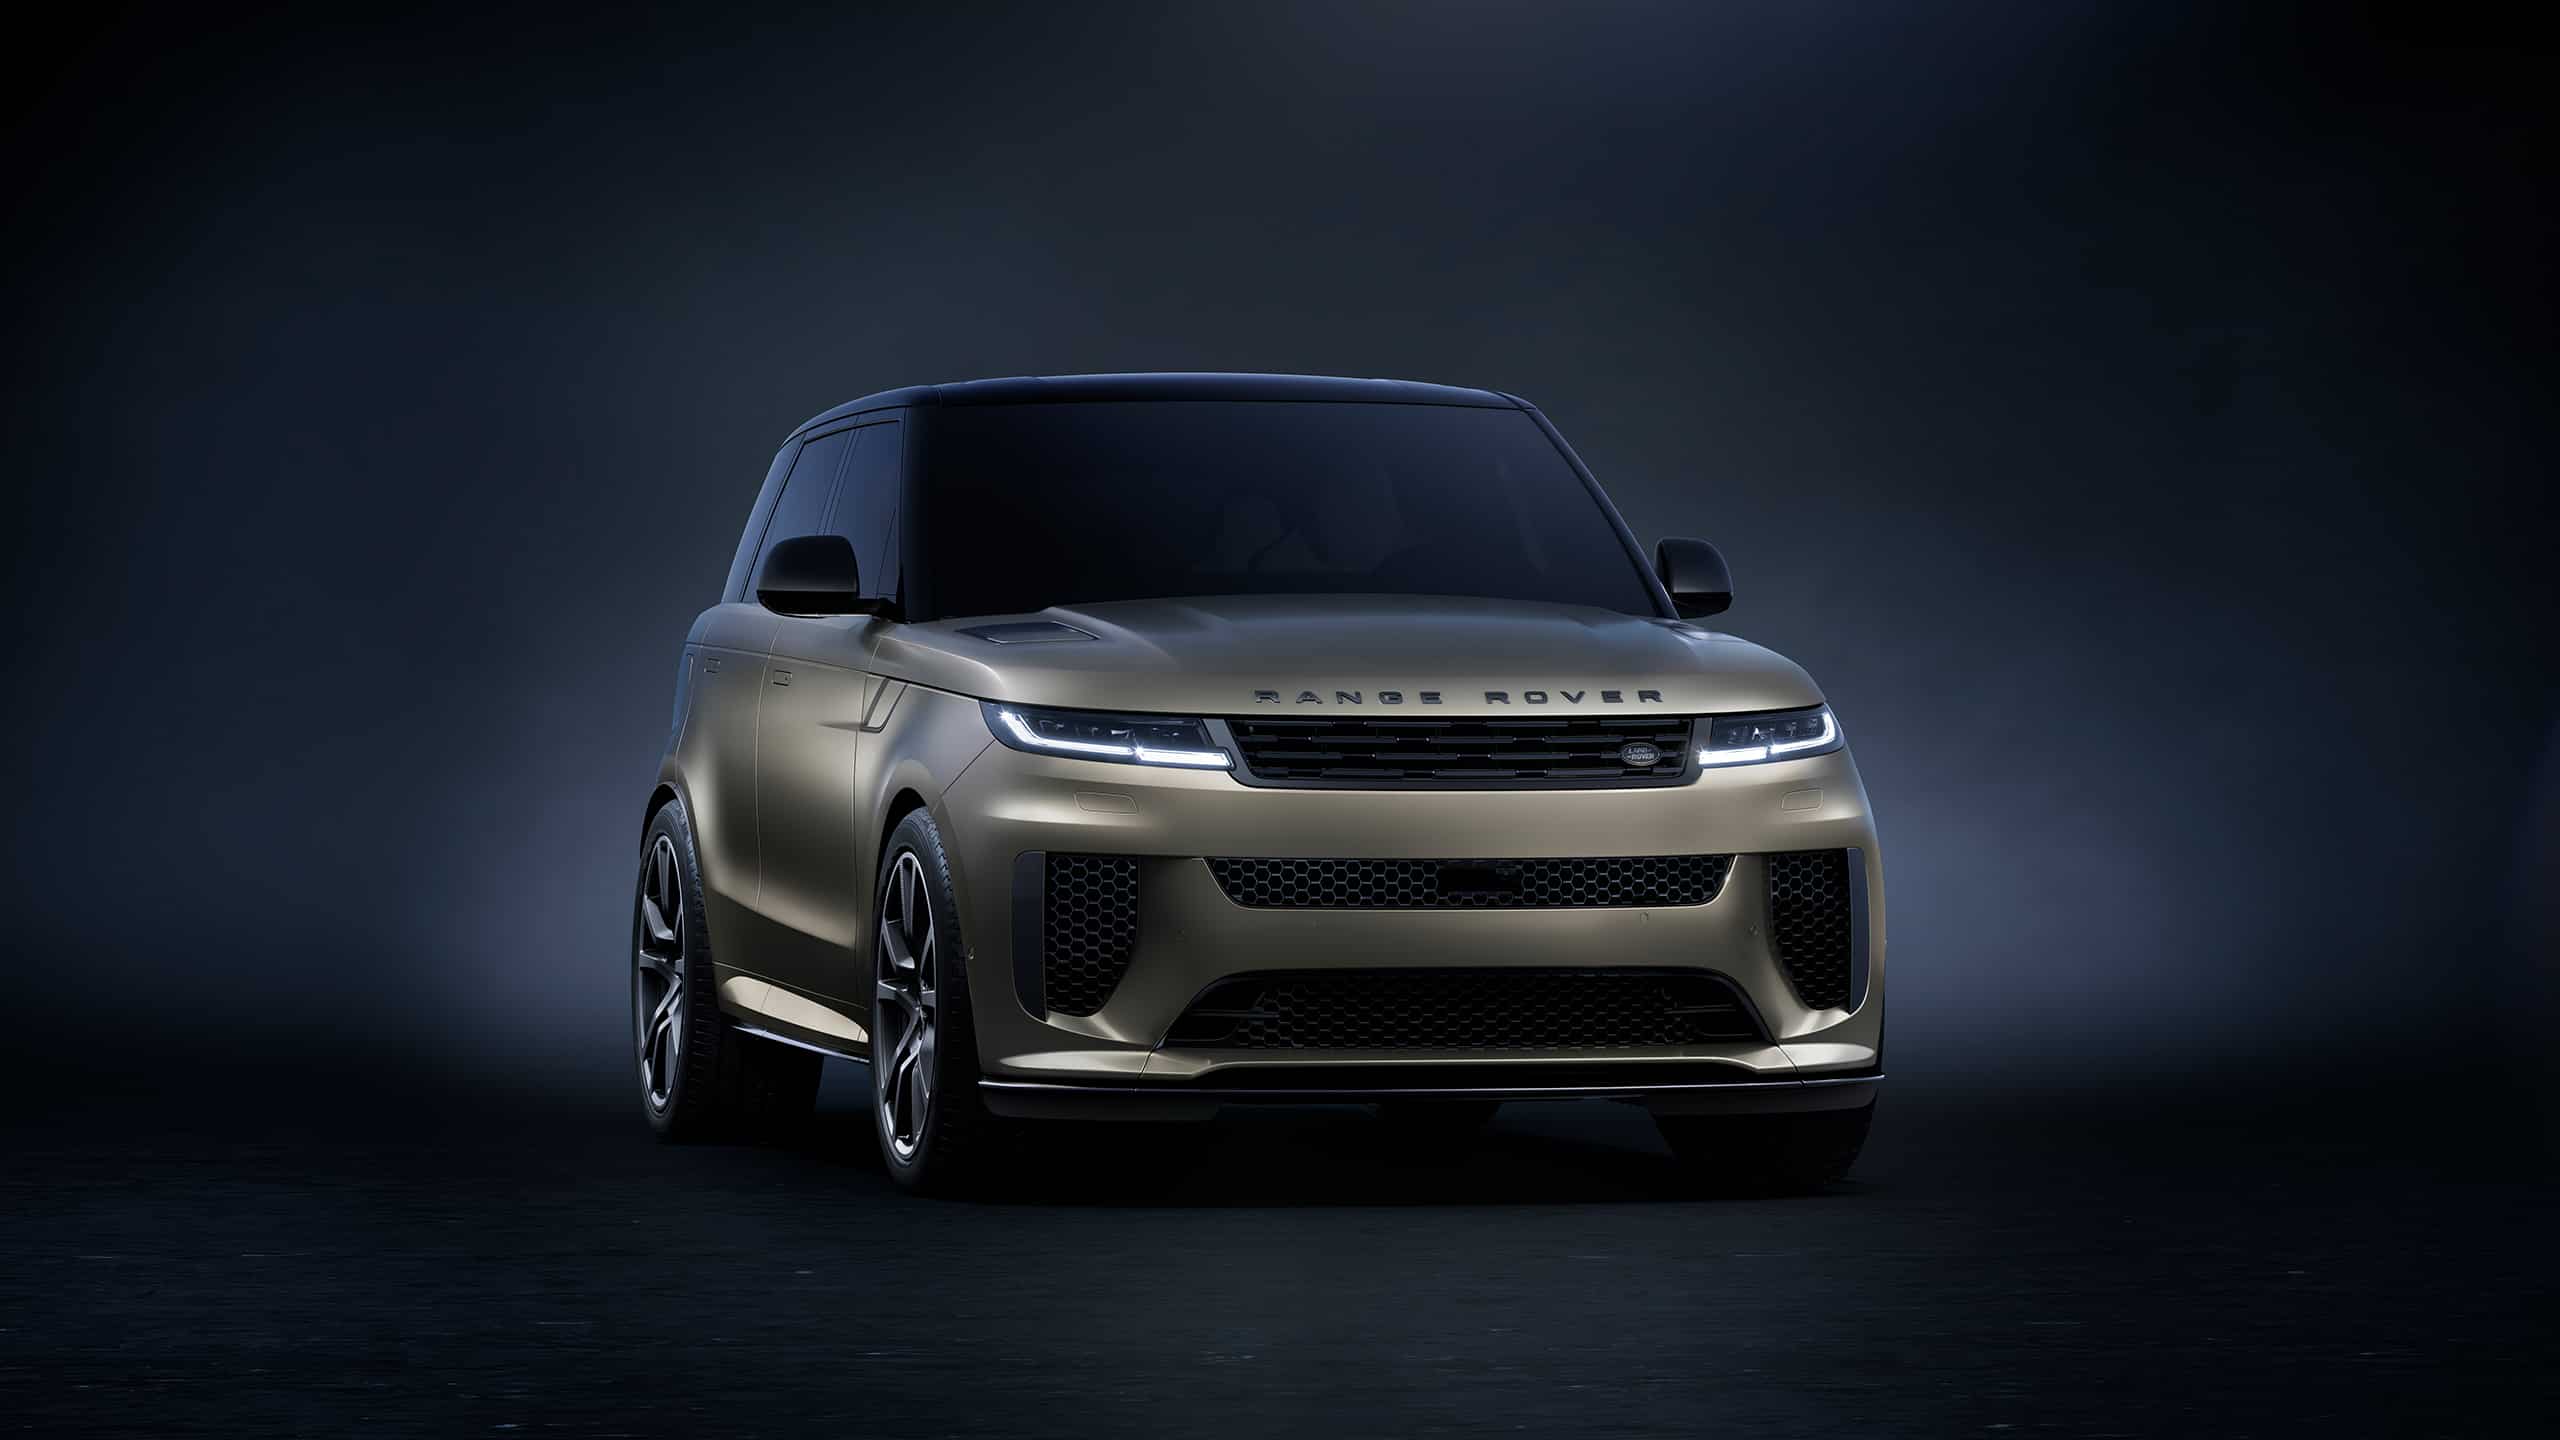 Front view of Range Rover SV